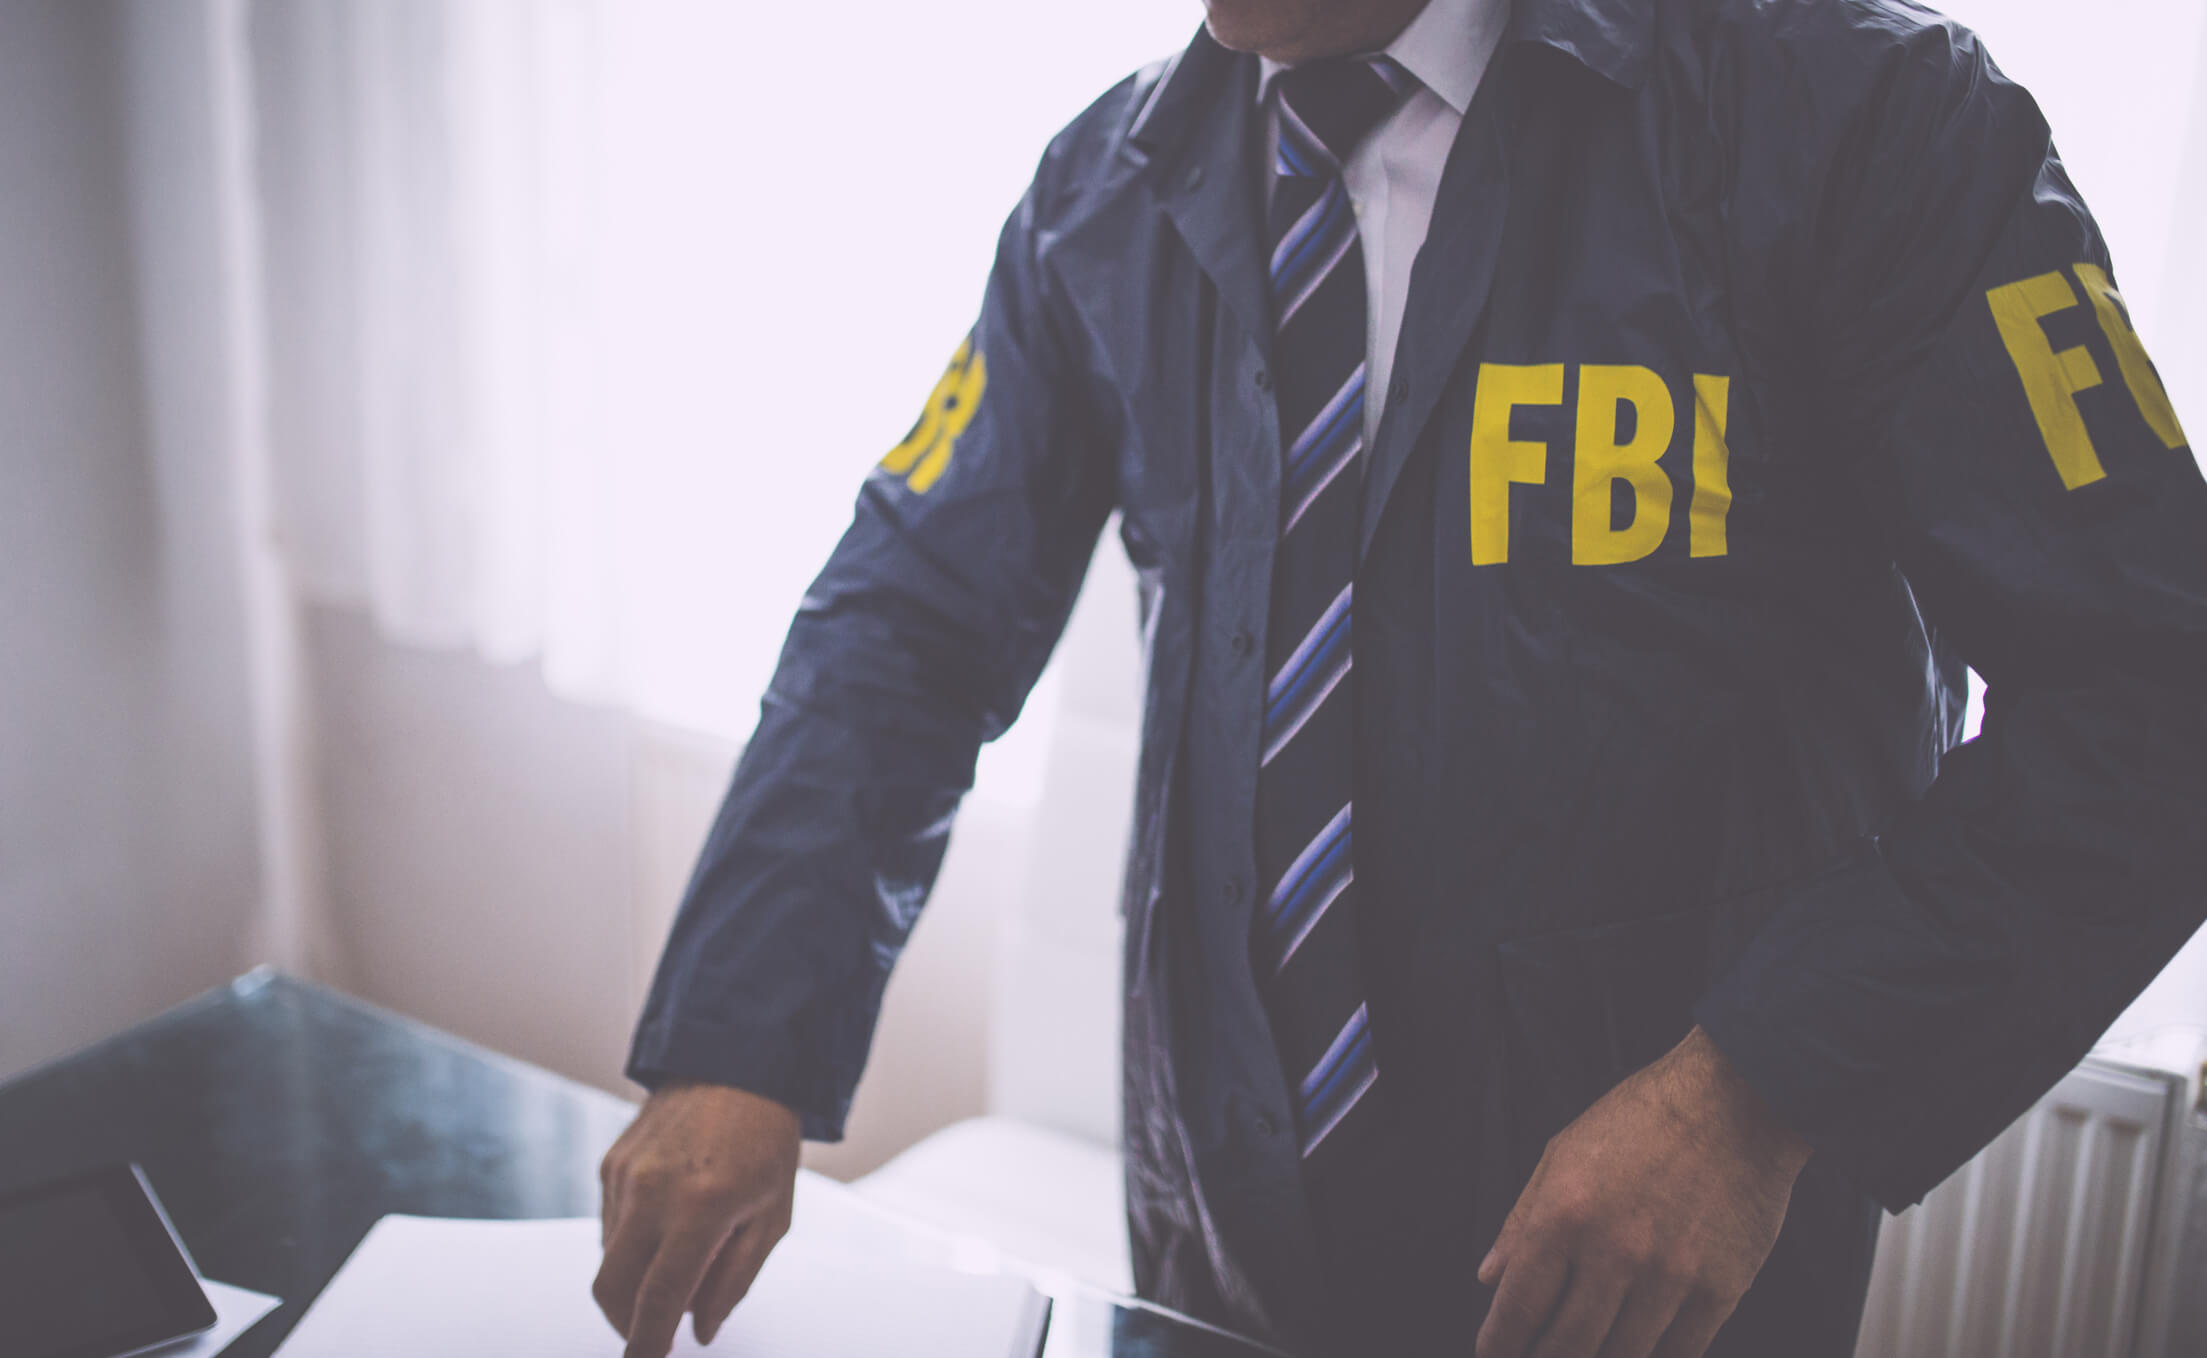 Person in jacket with the letters FBI printed on it